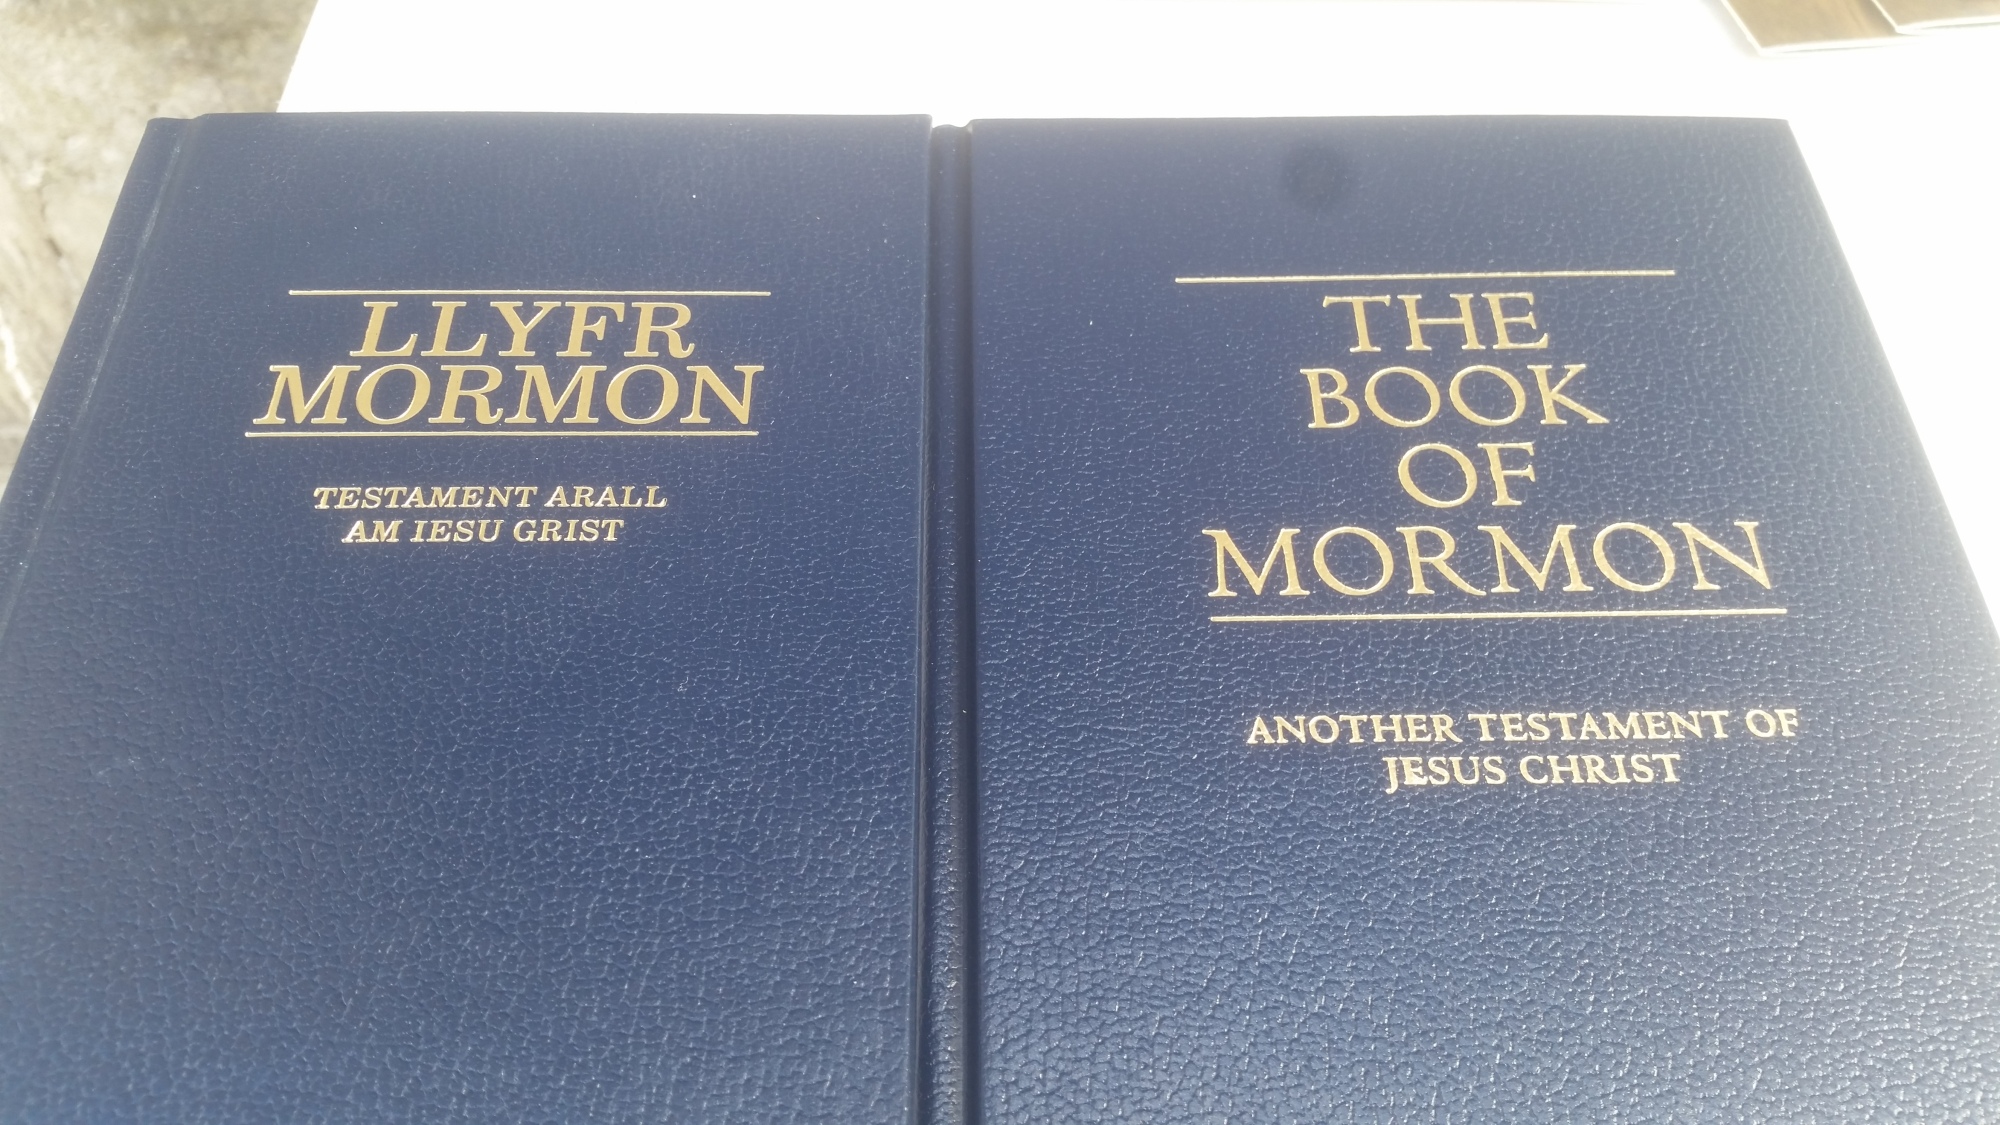 The Book of Mormon, printed in the Welsh and English language